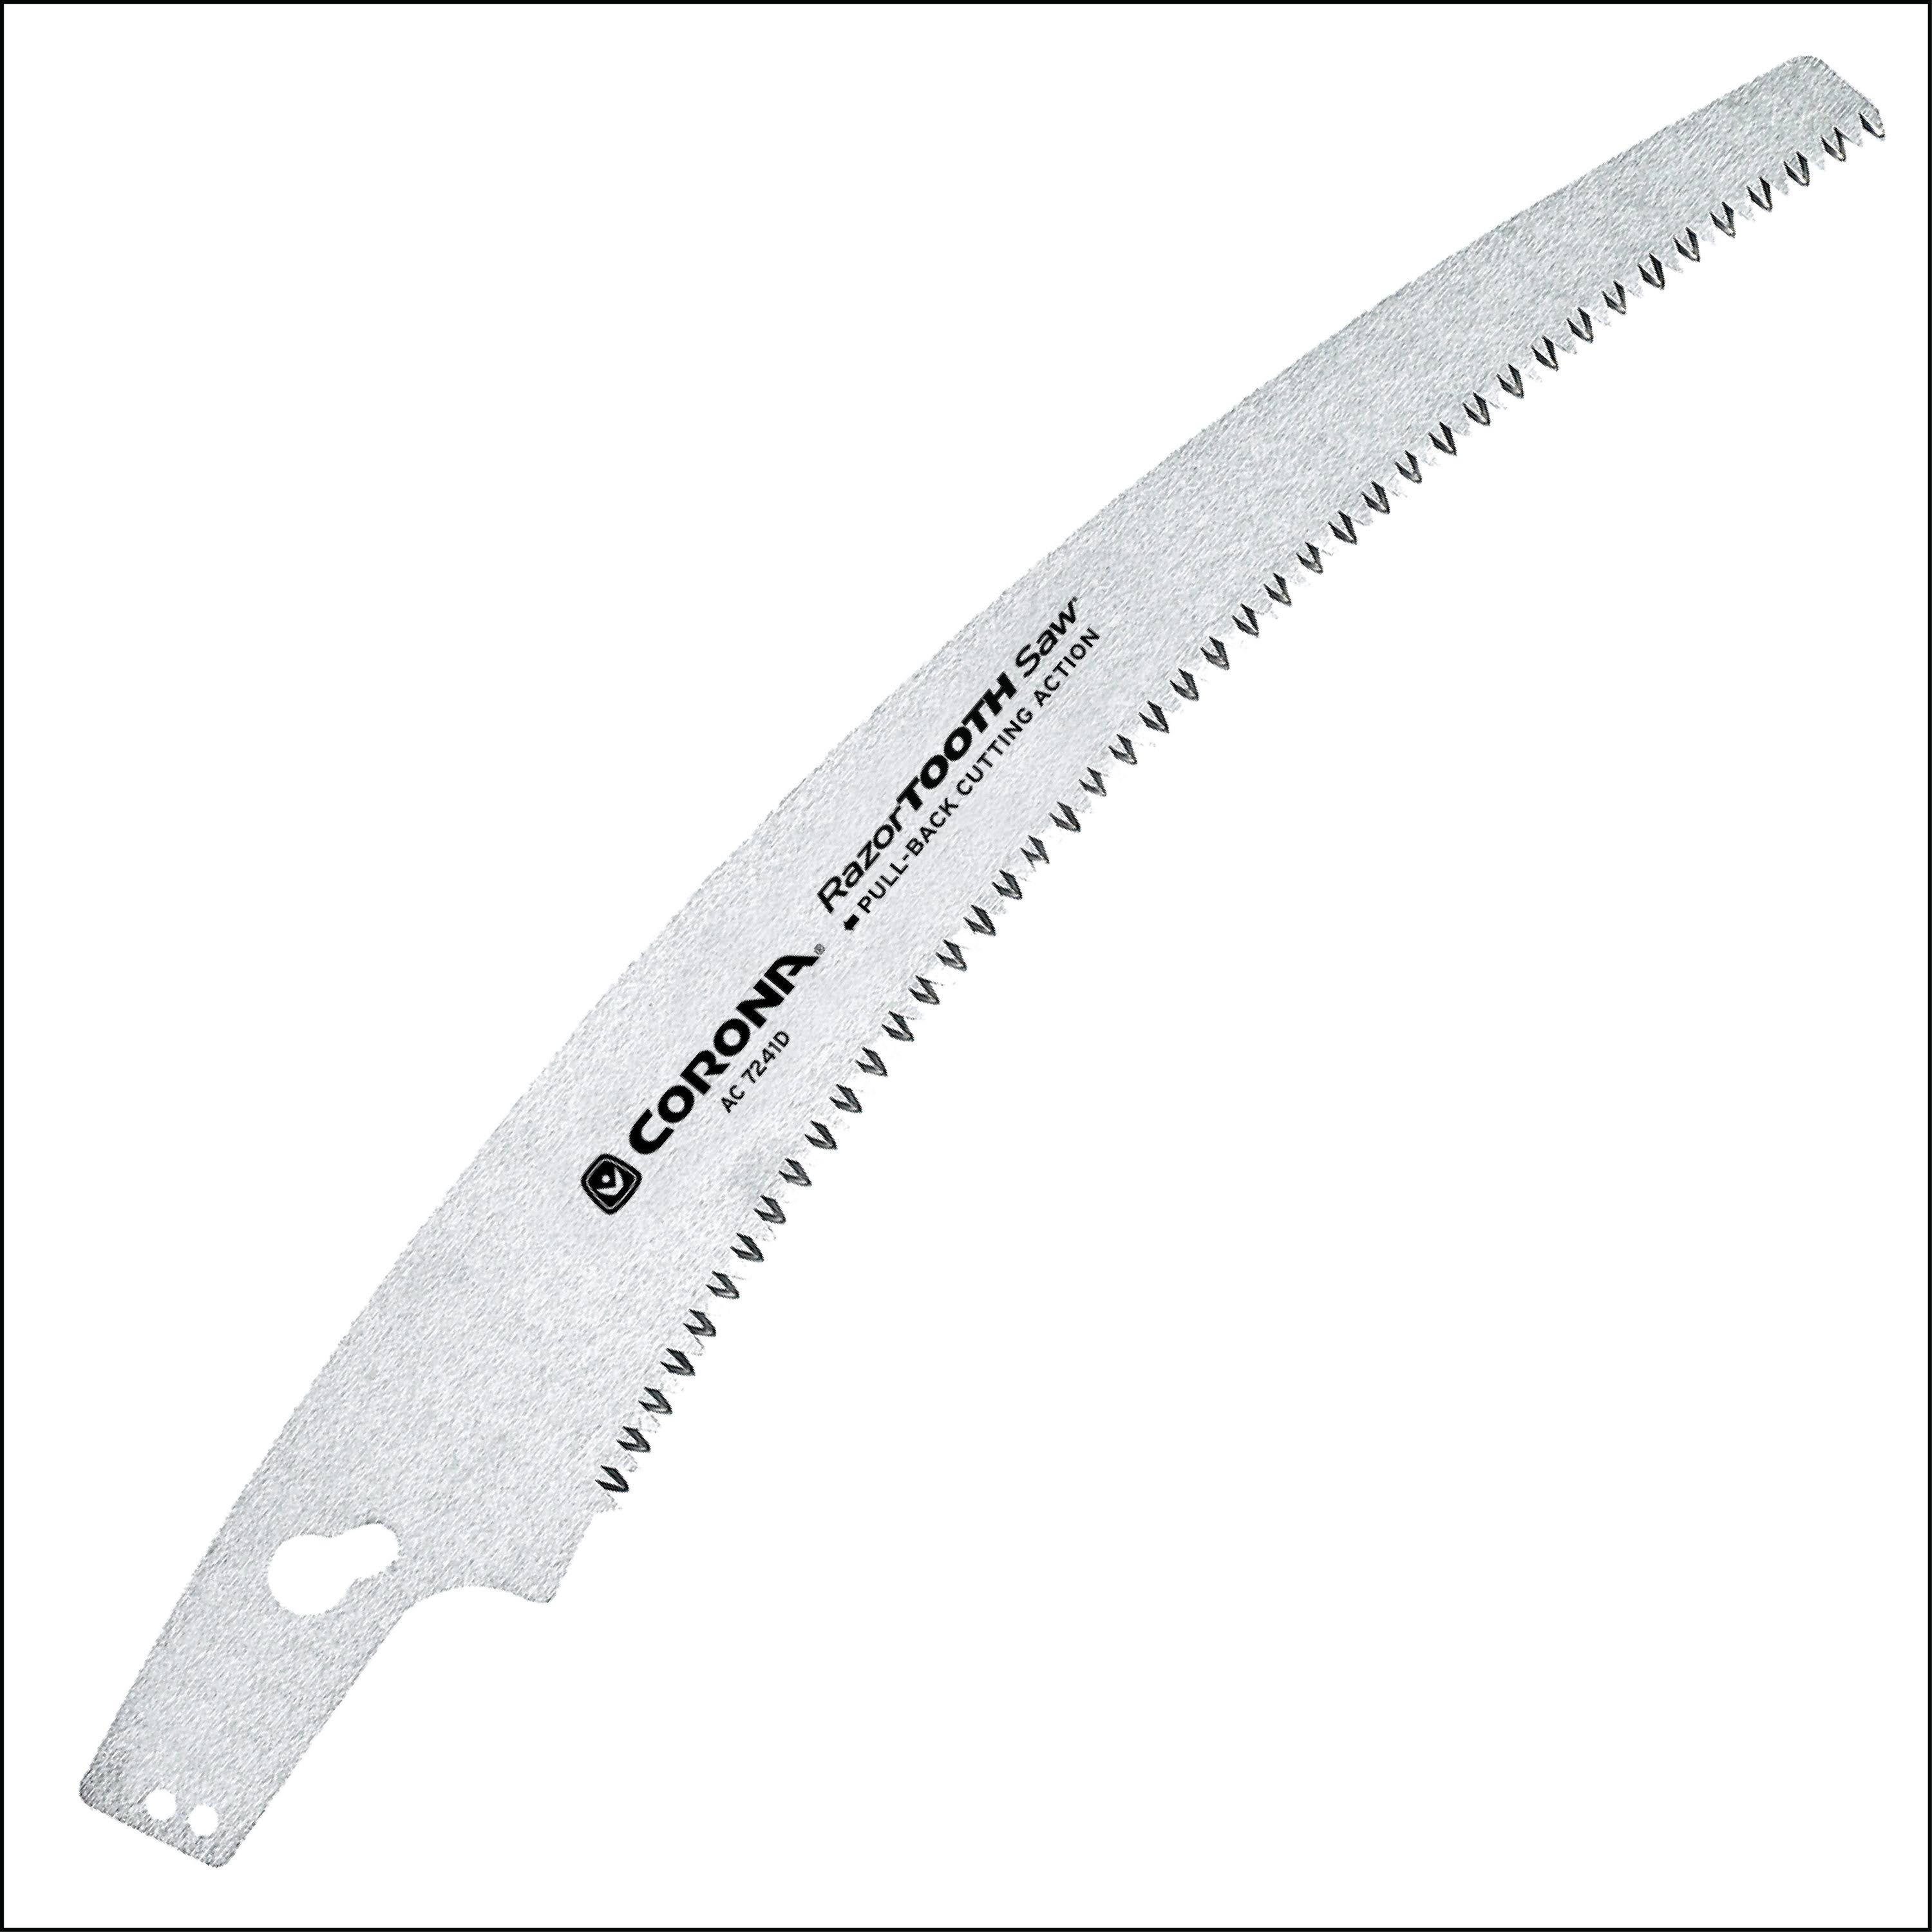 Corona AC 7241D Razor Tooth Tree Pruner Saw Blade - for TP 6870, TP 6850 and TP 6830, Steel